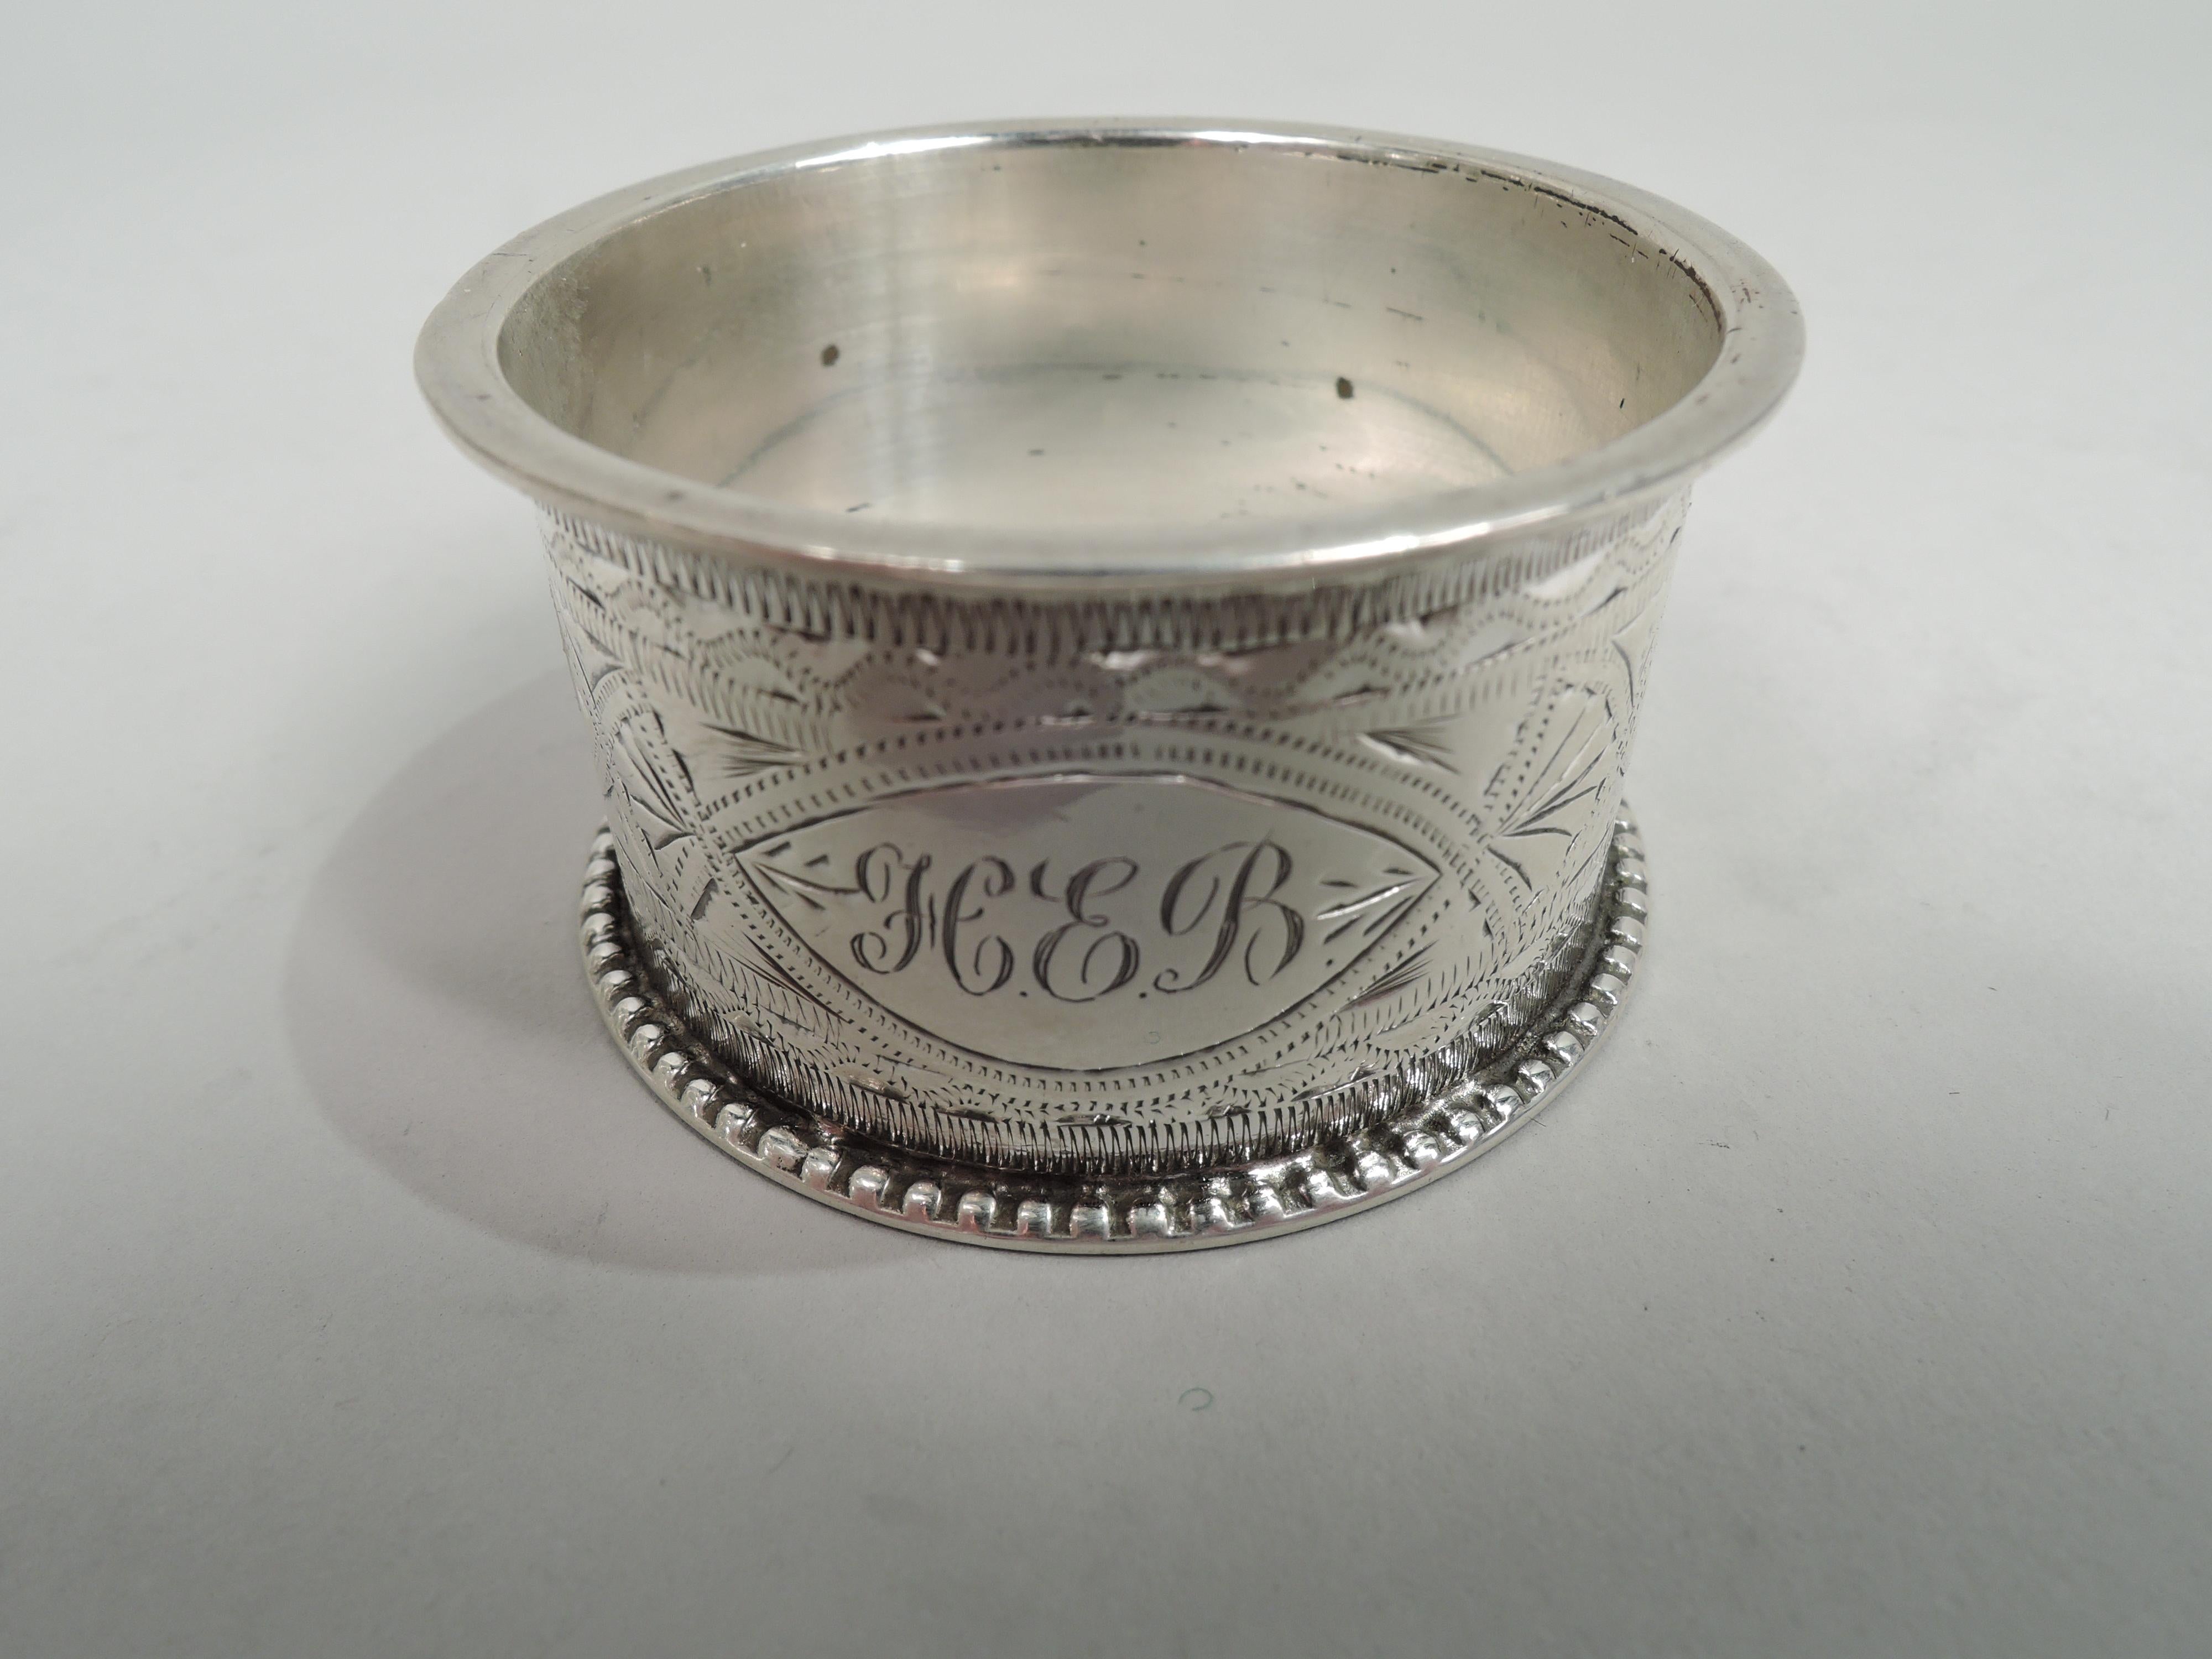 English Victorian Aesthetic sterling silver napkin ring, 1897. Retailed by T. Beardmore in Birmingham. Bright-cut stylized ornament: Guilloche border inset with flower heads between zigzag and wavy borders. Beaded rims. Fully marked.